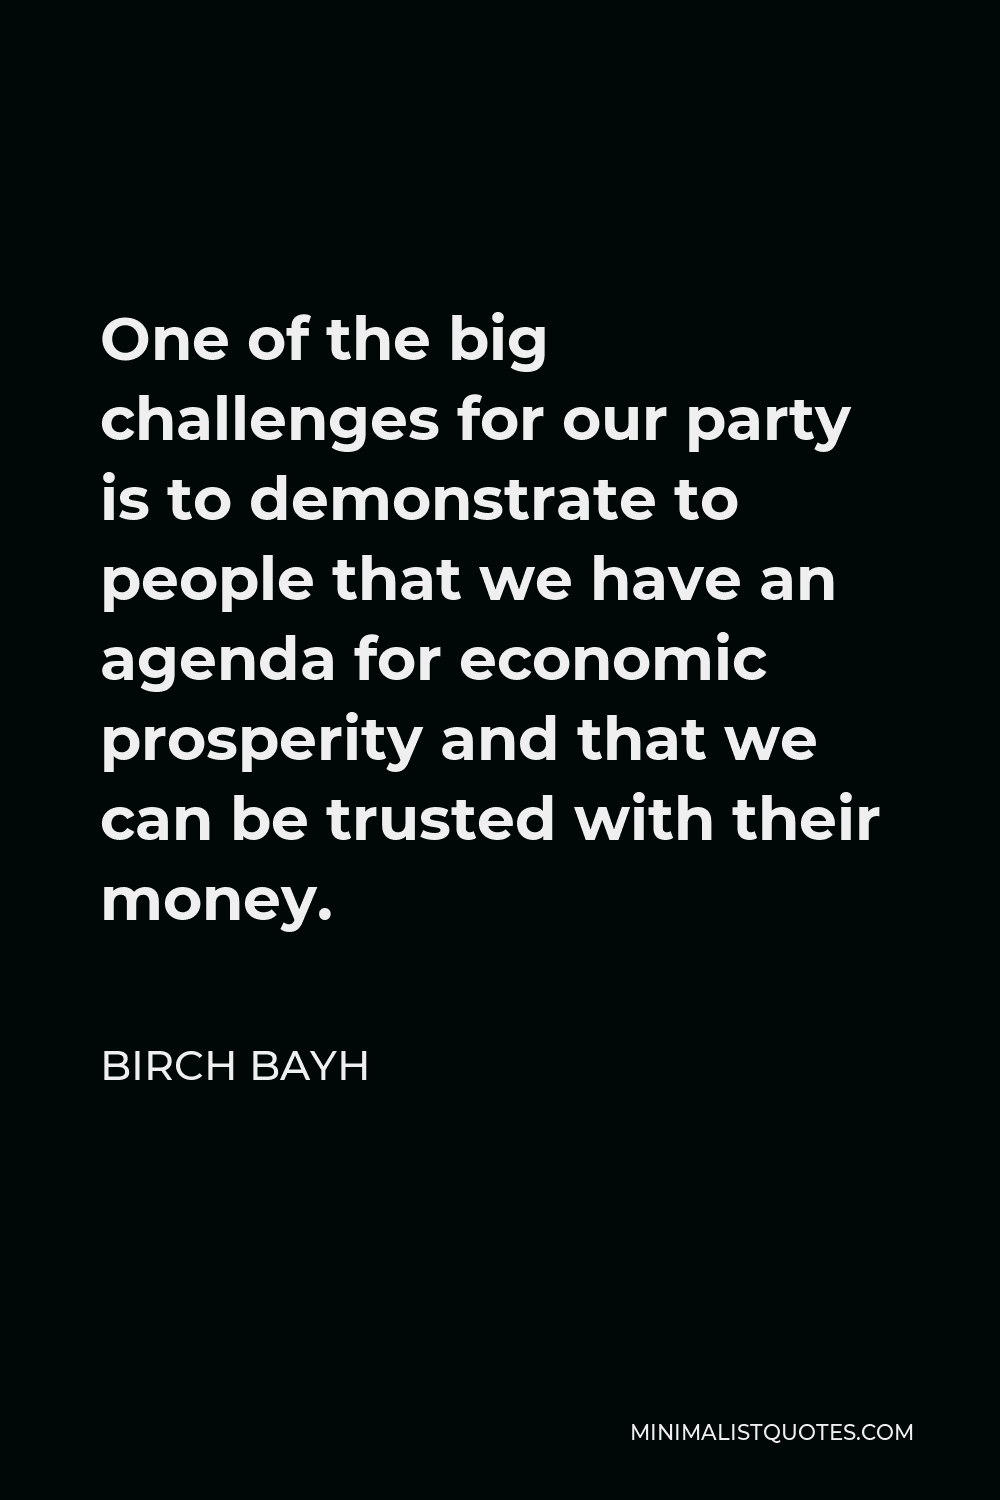 Birch Bayh Quote - One of the big challenges for our party is to demonstrate to people that we have an agenda for economic prosperity and that we can be trusted with their money.